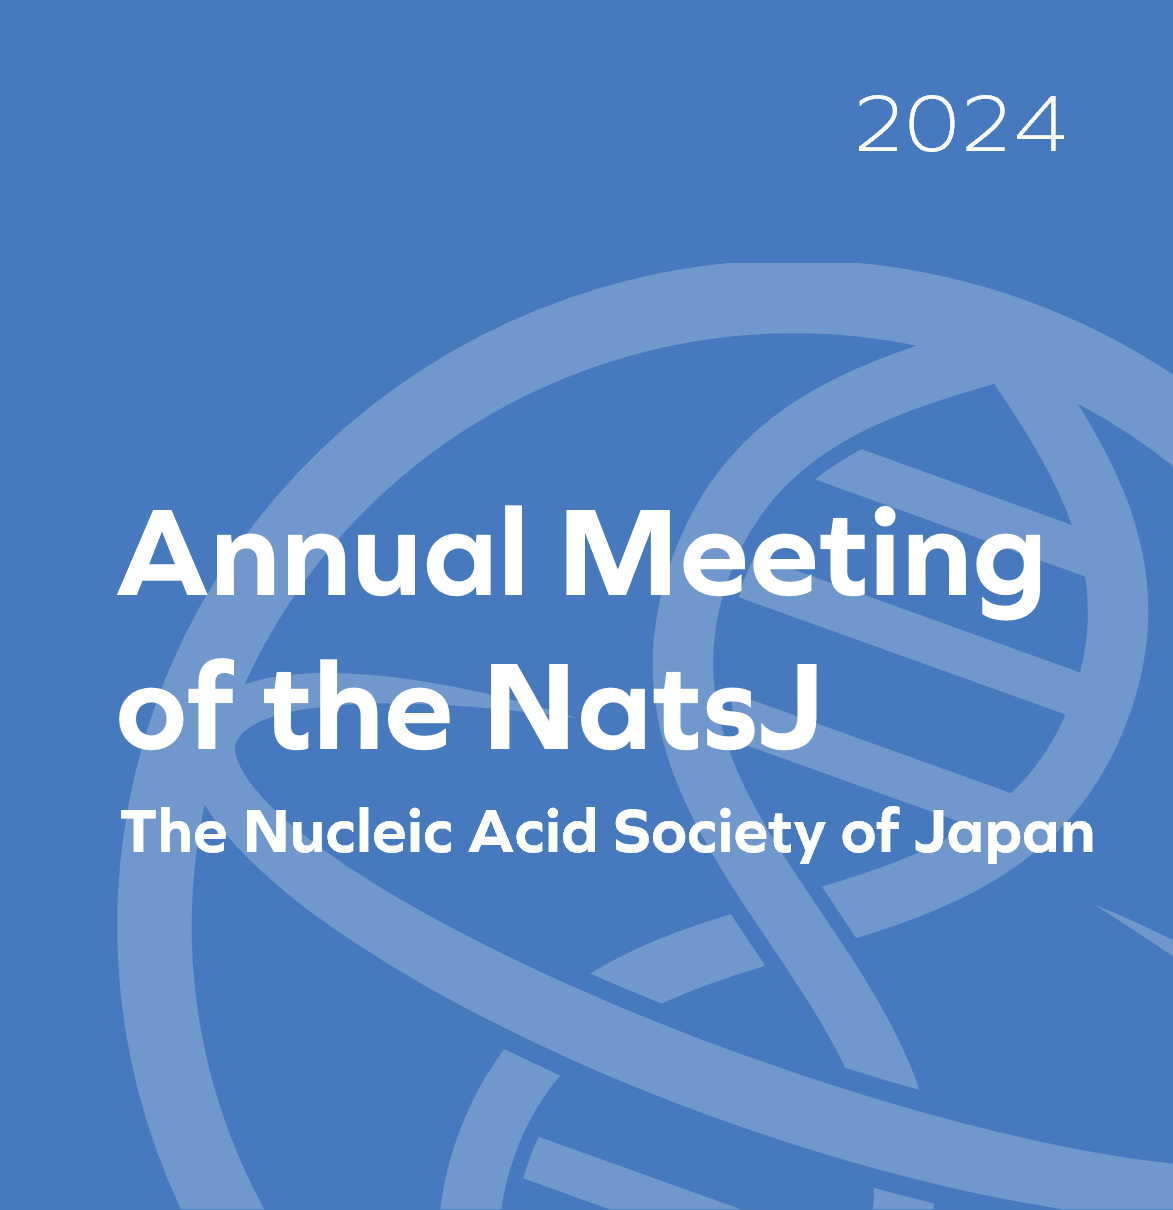 Annual Meeting of The Nucleic Acid Society of Japan (NatsJ)